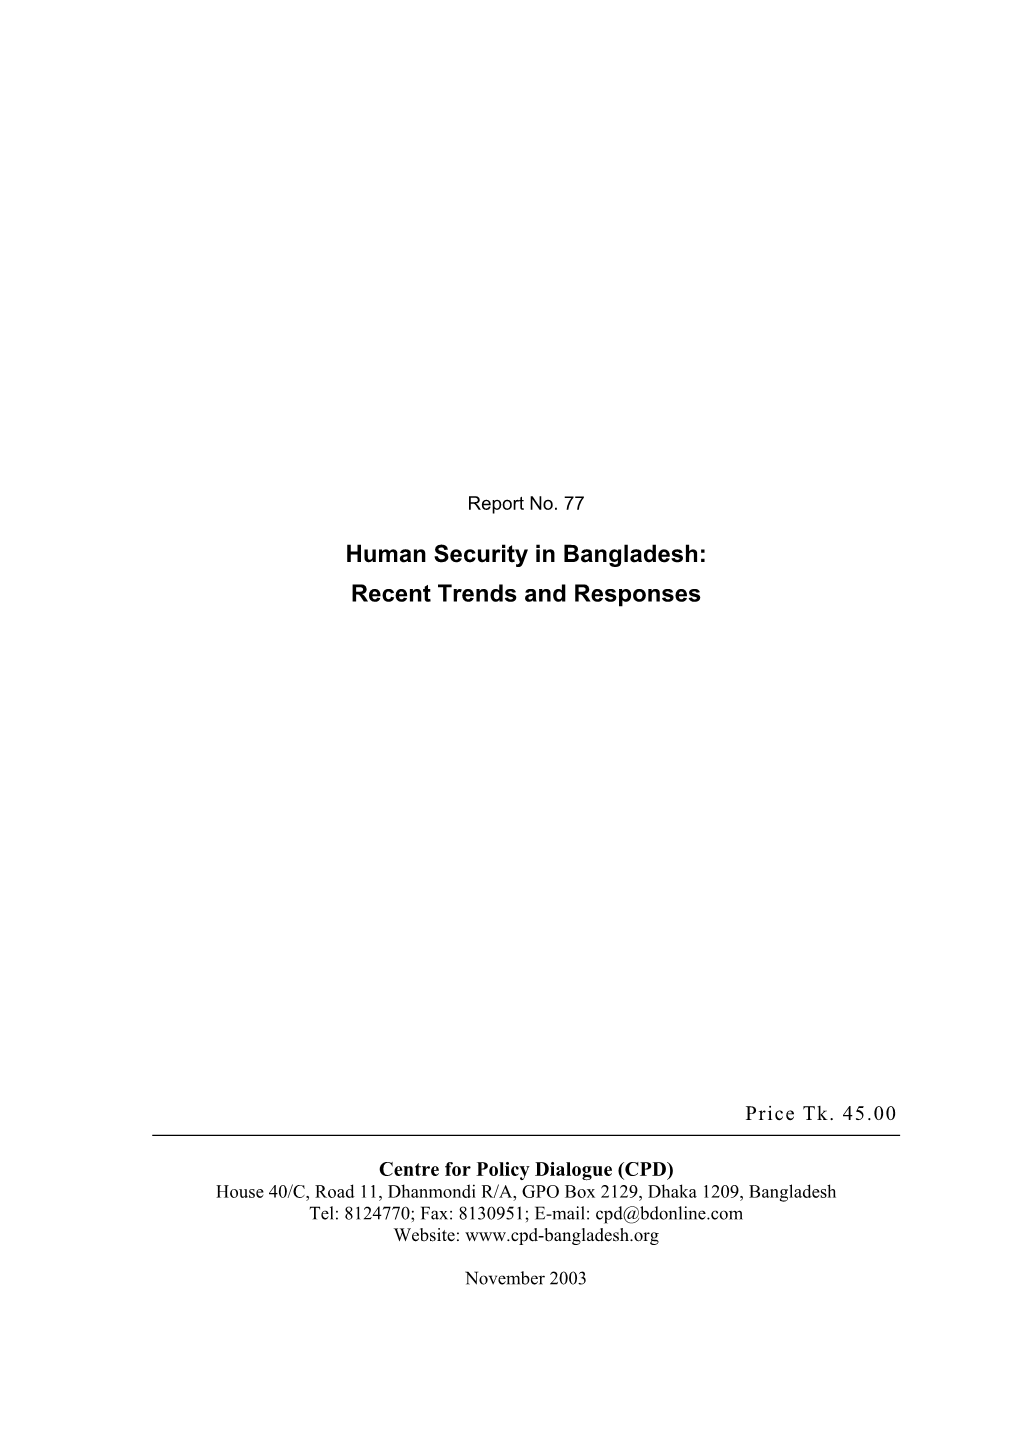 Human Security in Bangladesh: Recent Trends and Responses